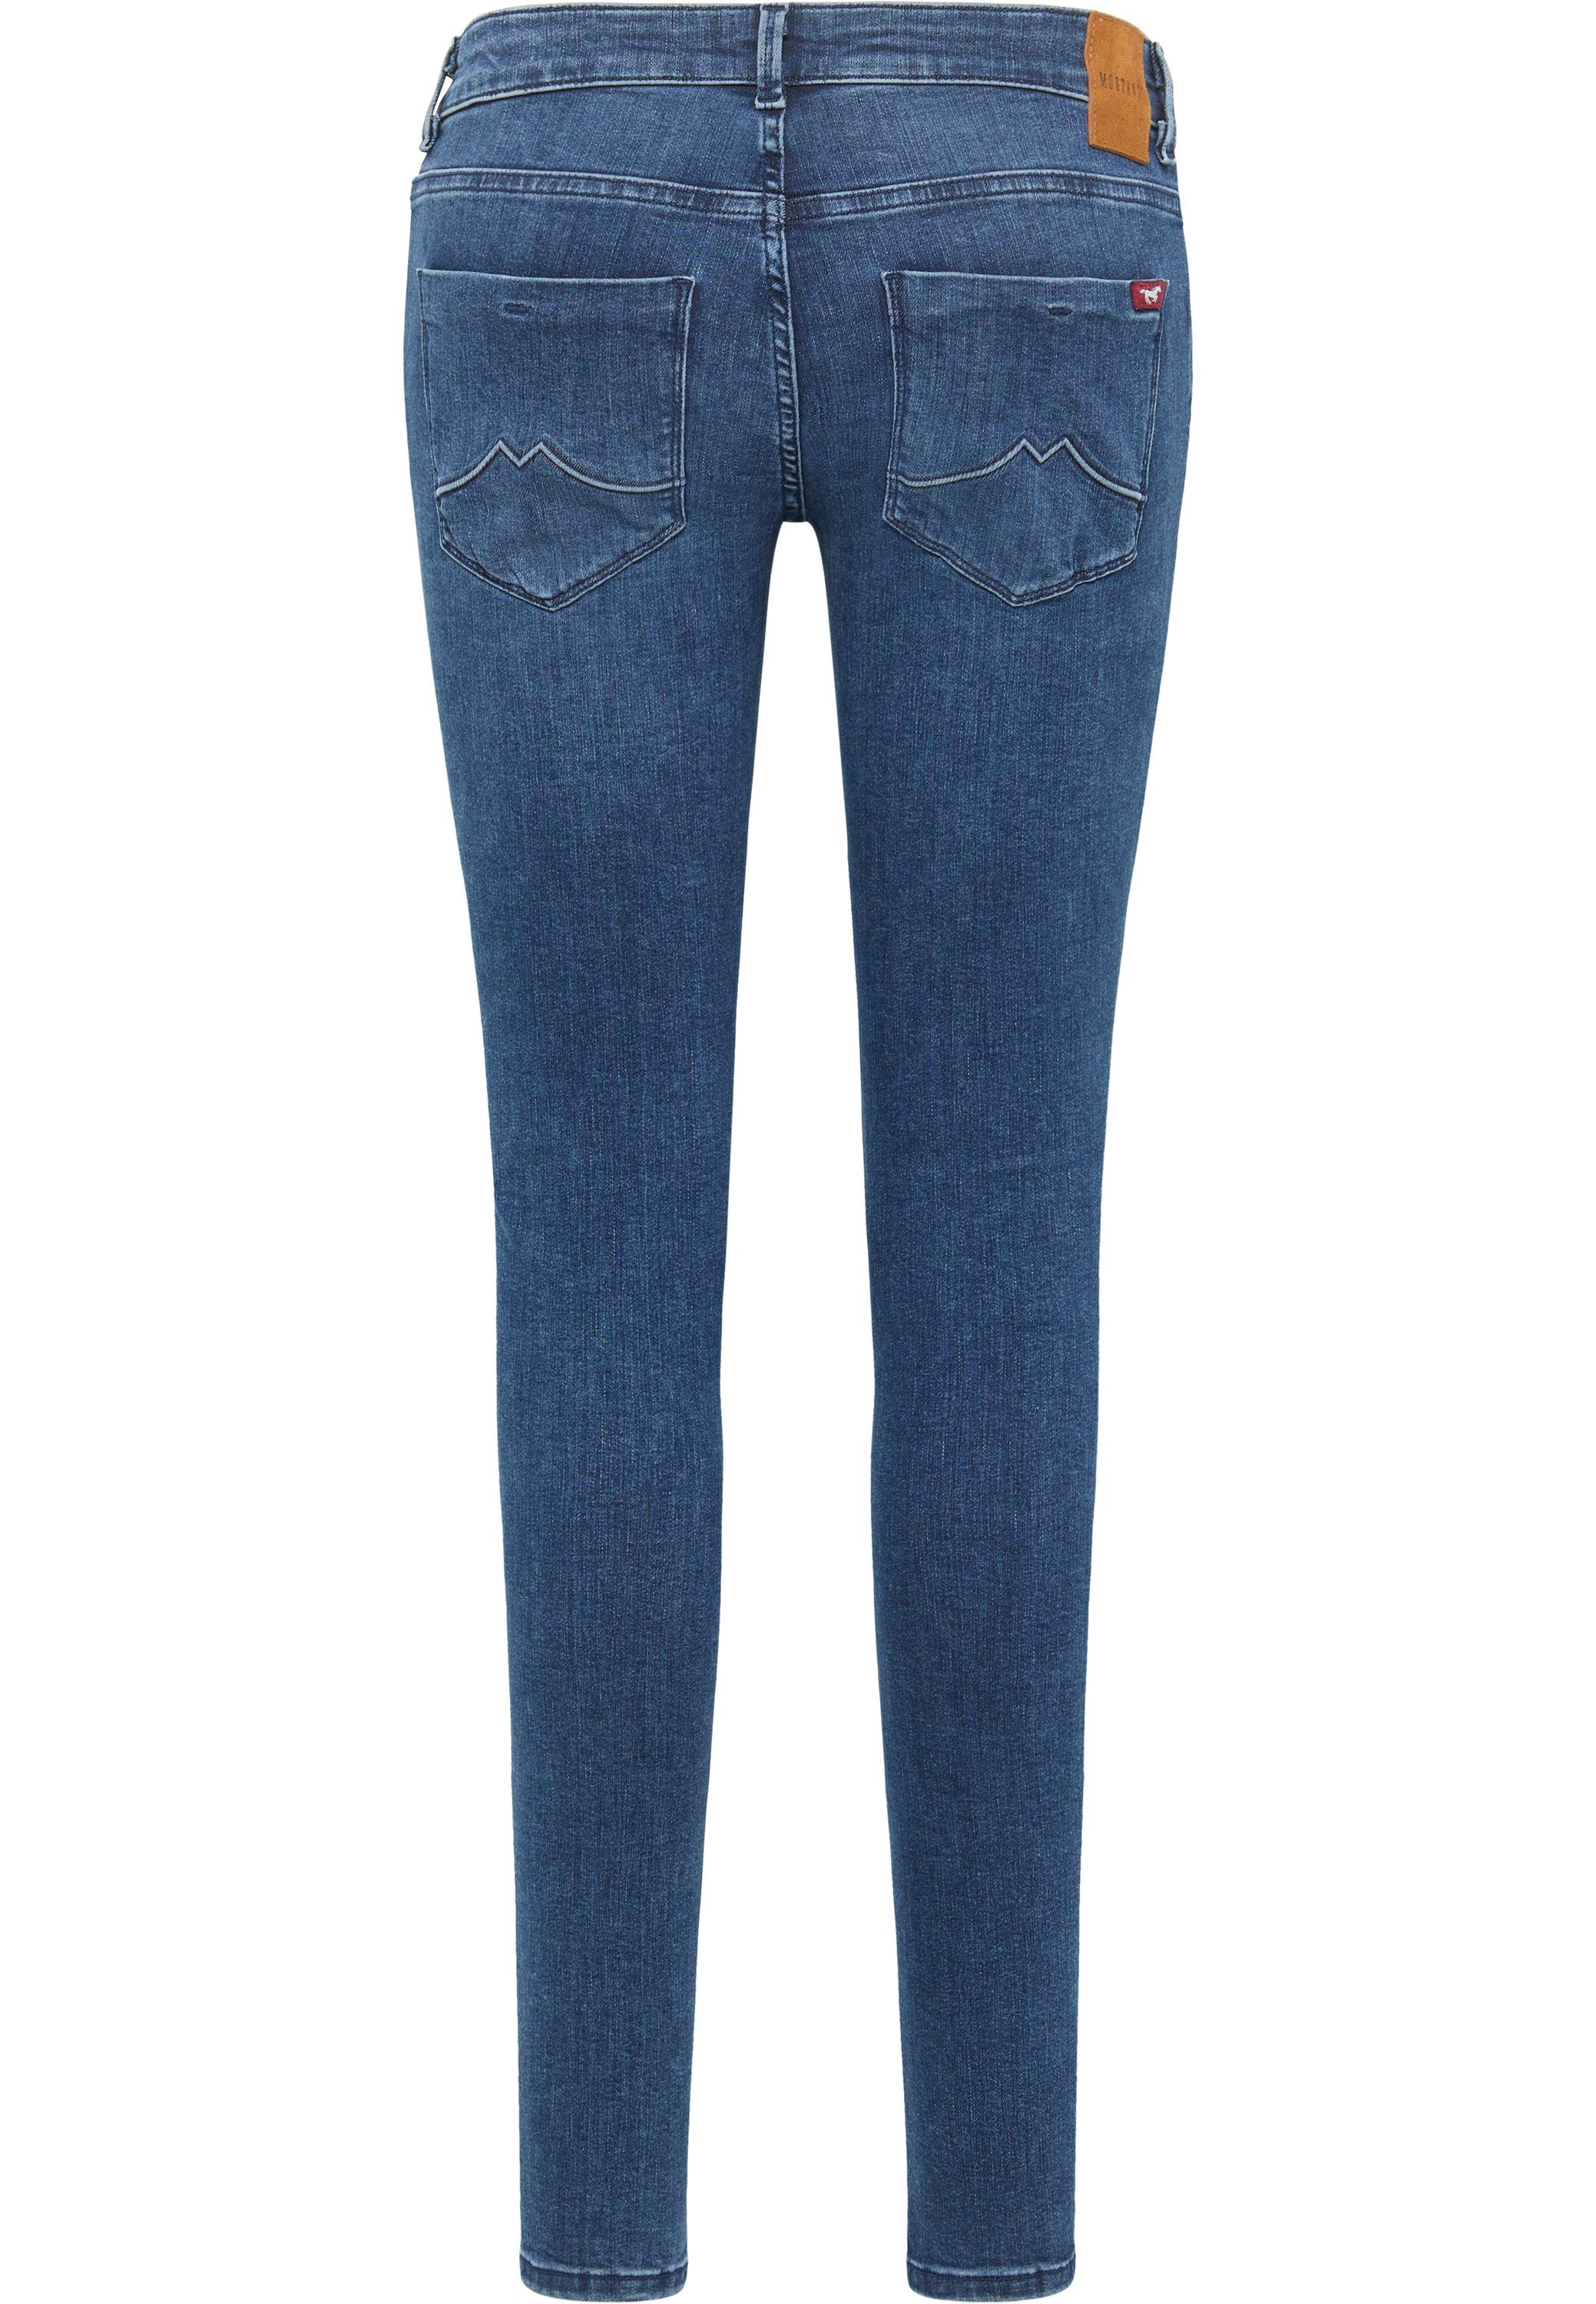 Mustang Skinny fit jeans Style Quincy Skinny